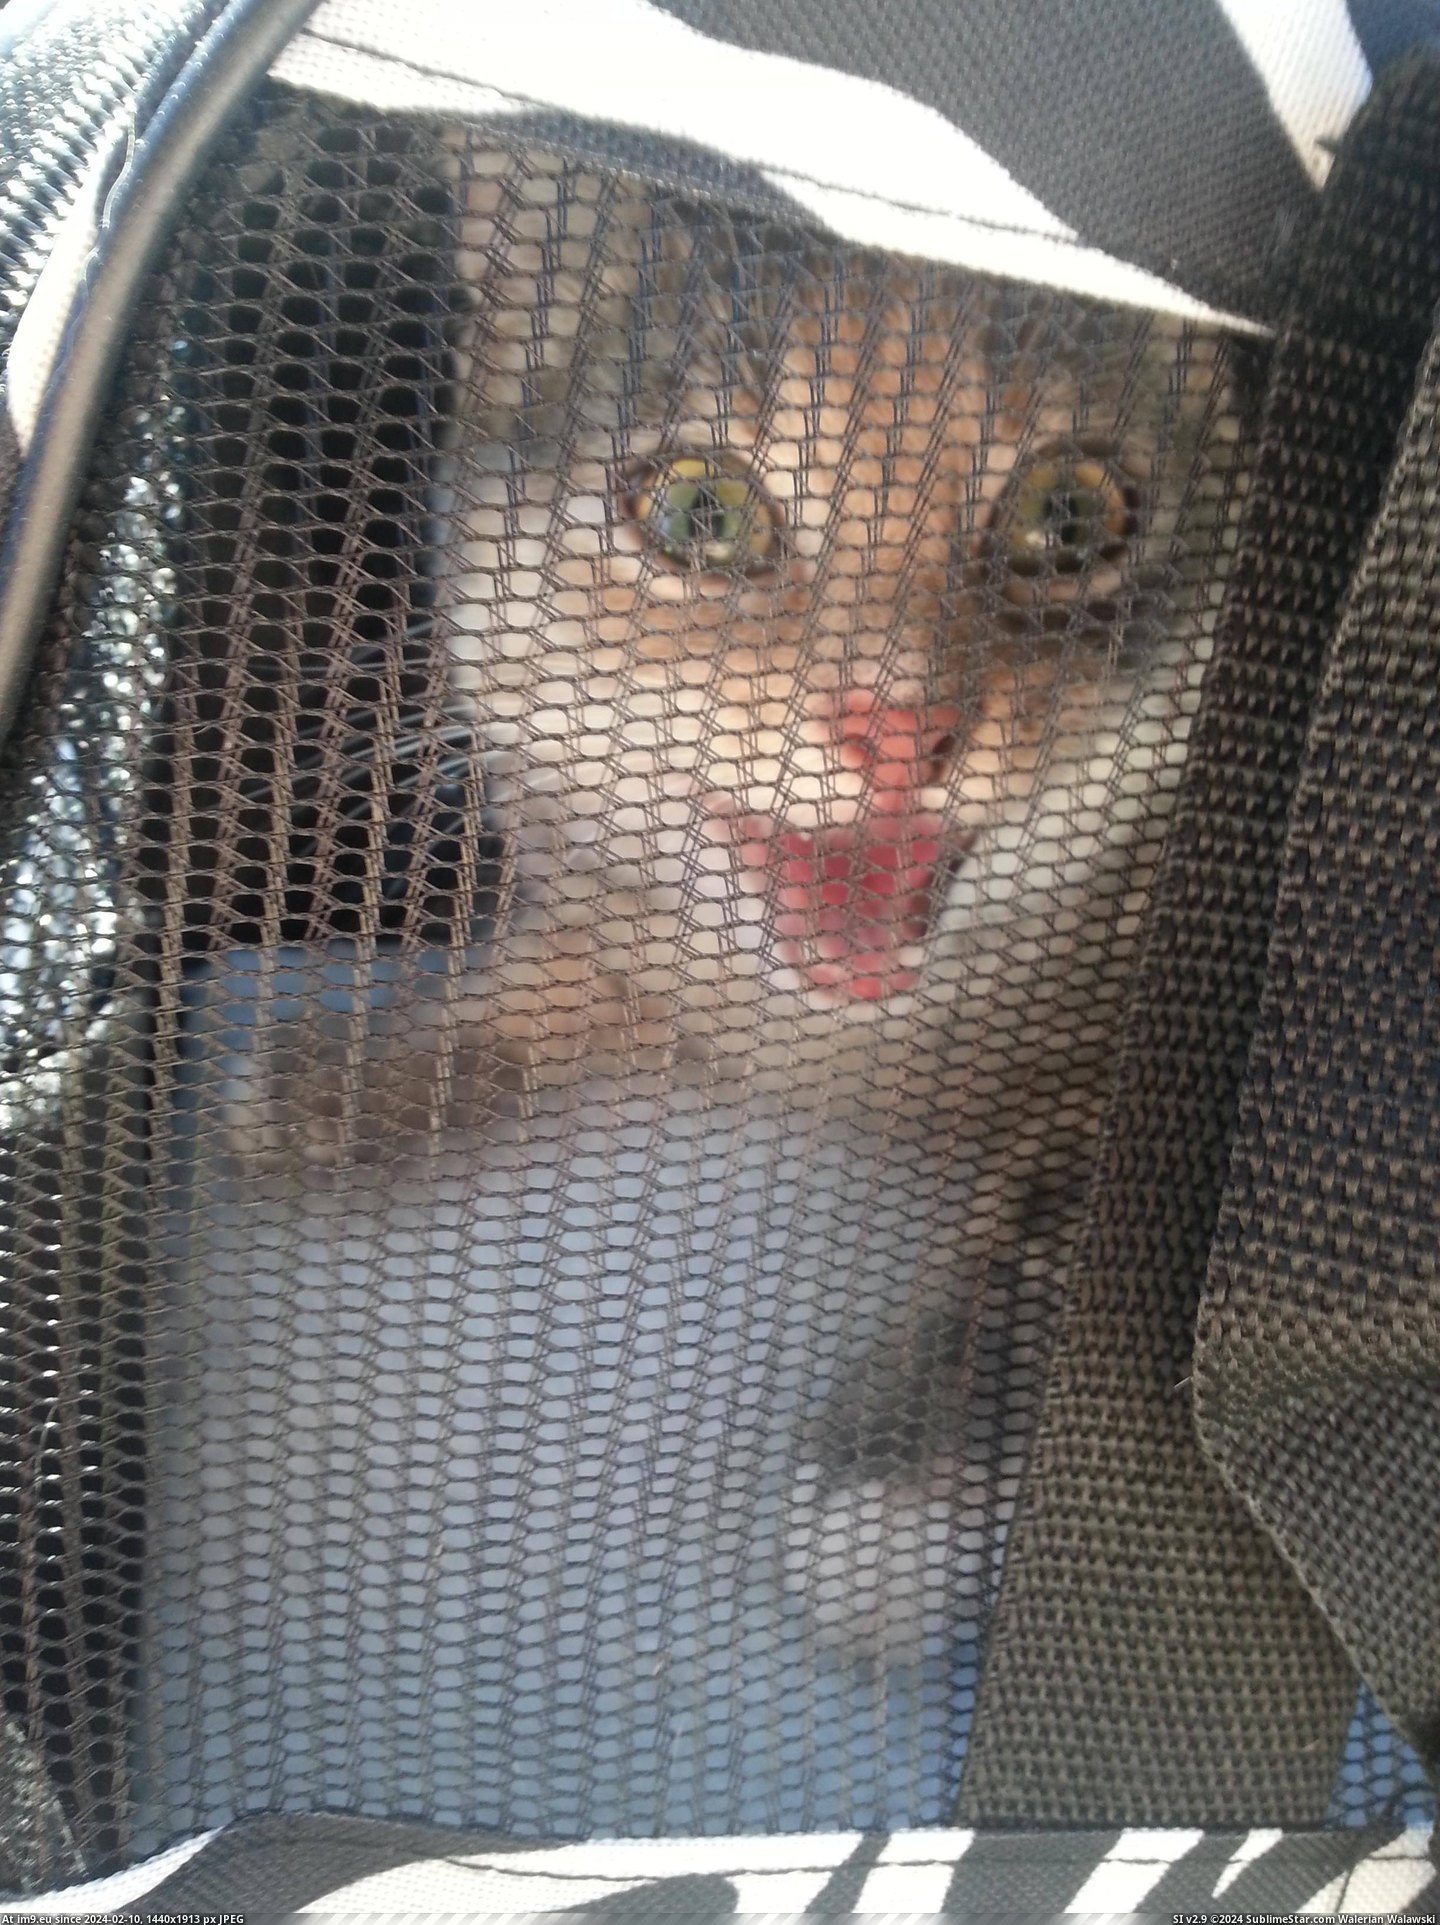 #Cats #Spayed #Reaction [Cats] Her reaction to getting spayed today... Pic. (Изображение из альбом My r/CATS favs))